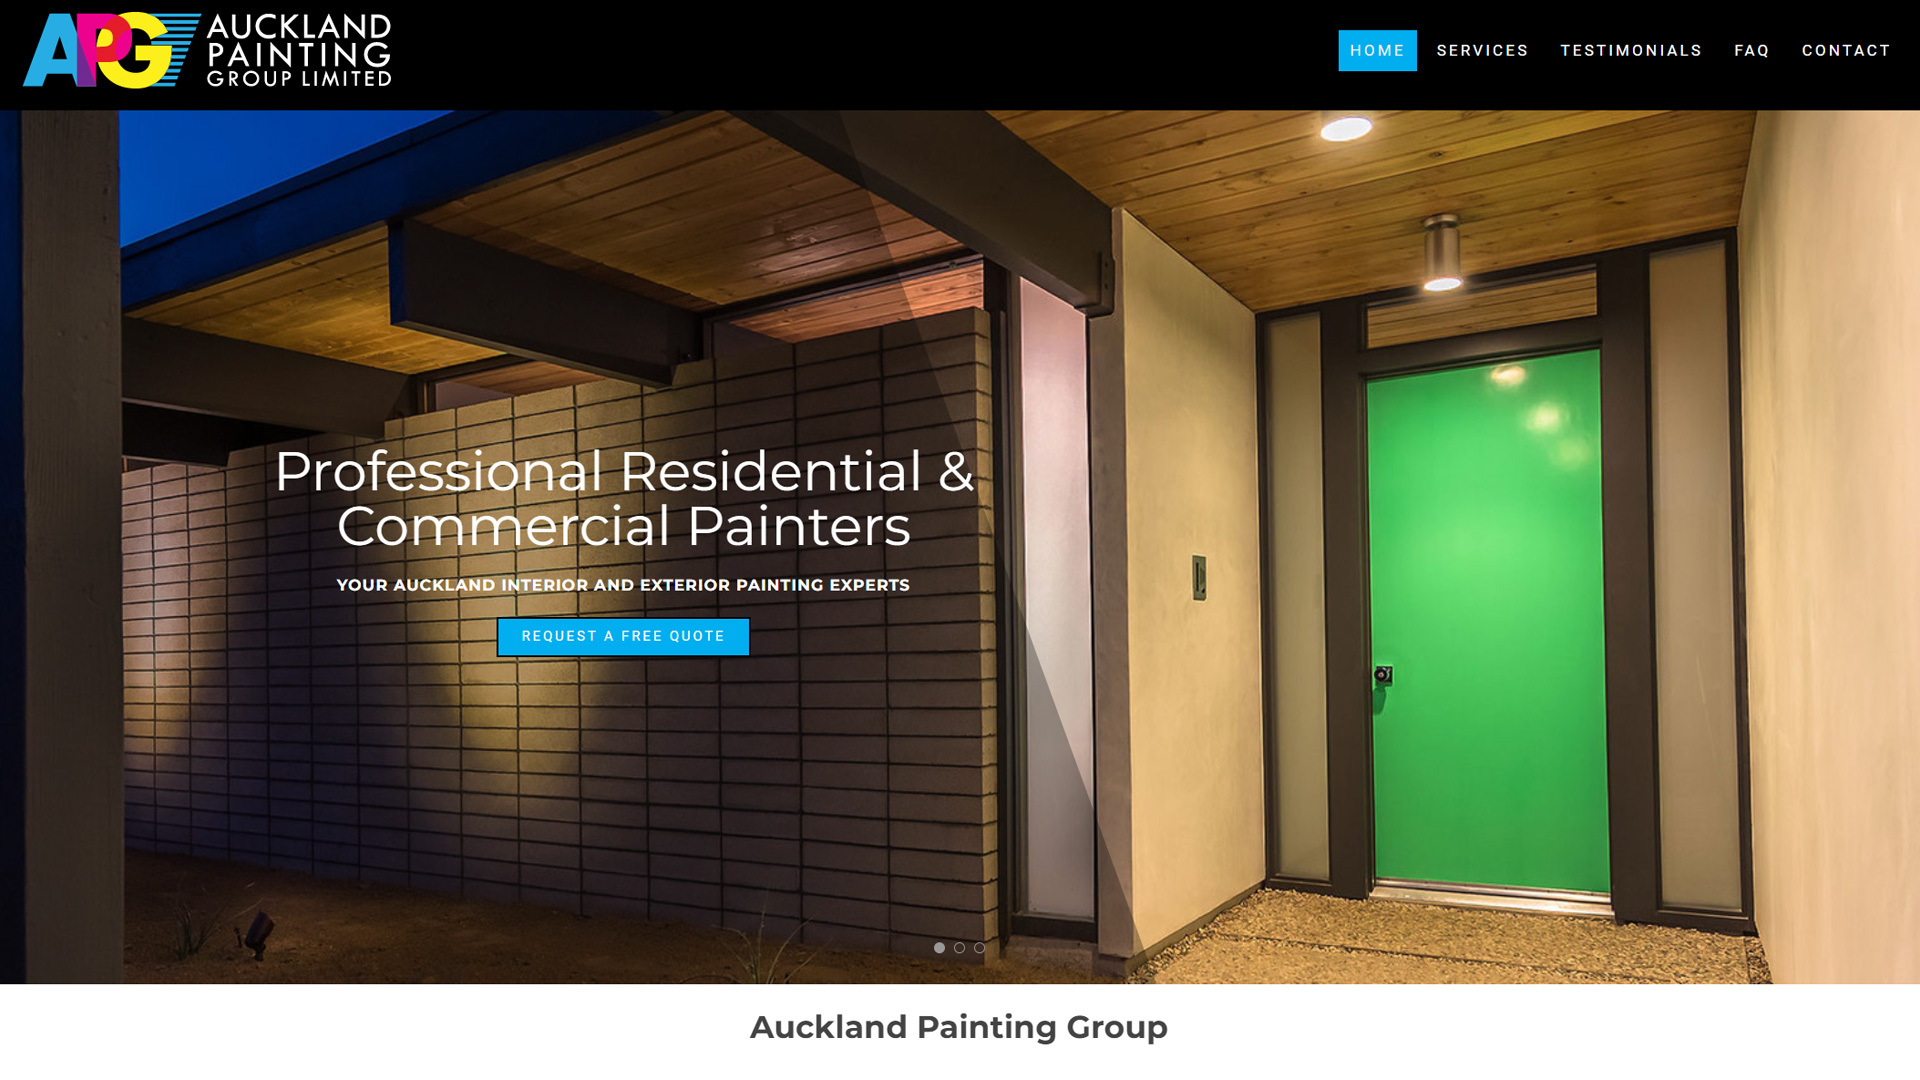 Auckland Painting Group Ltd